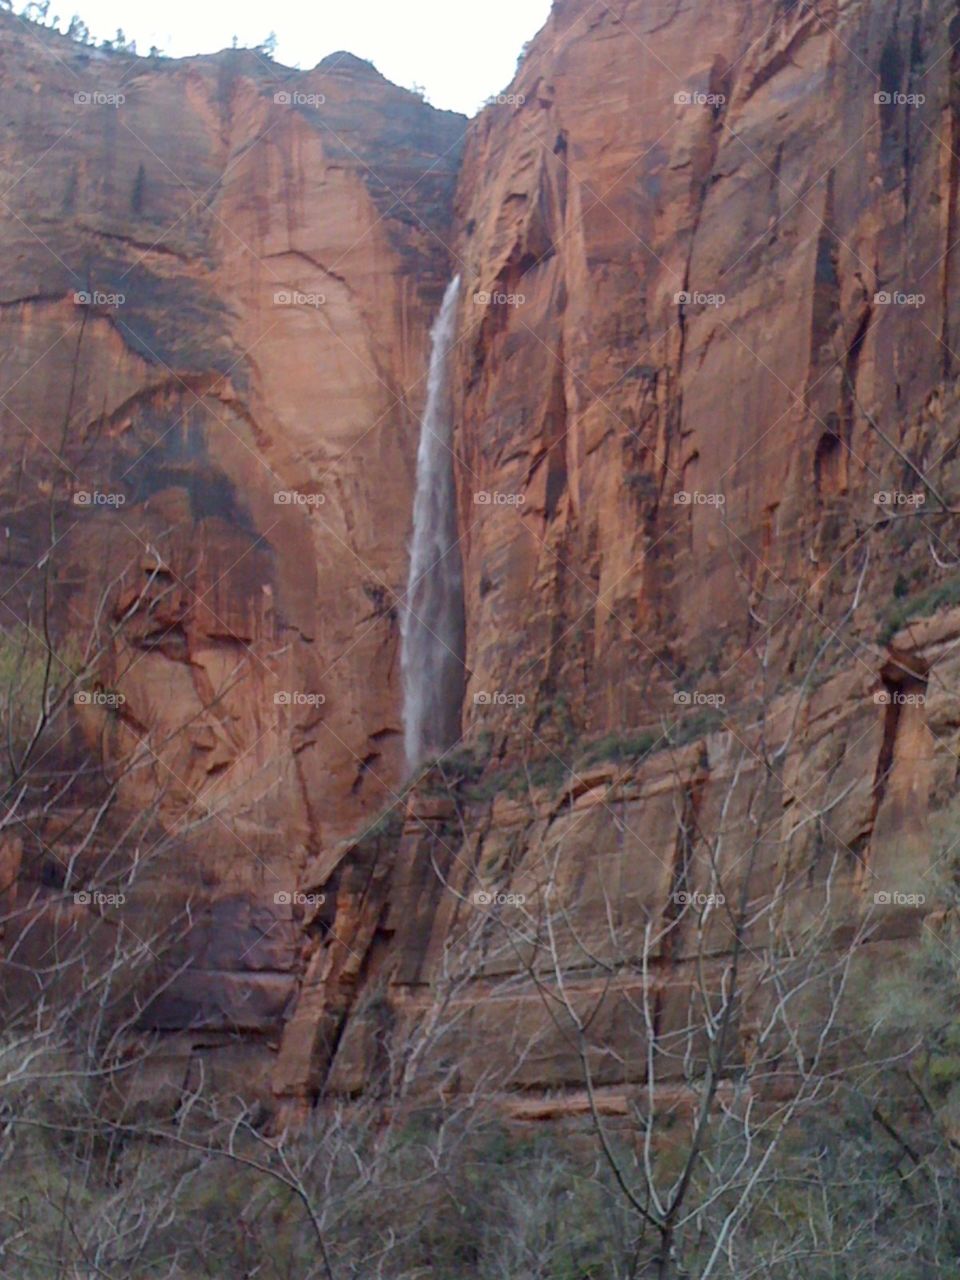 Waterfall in Zion National Park.